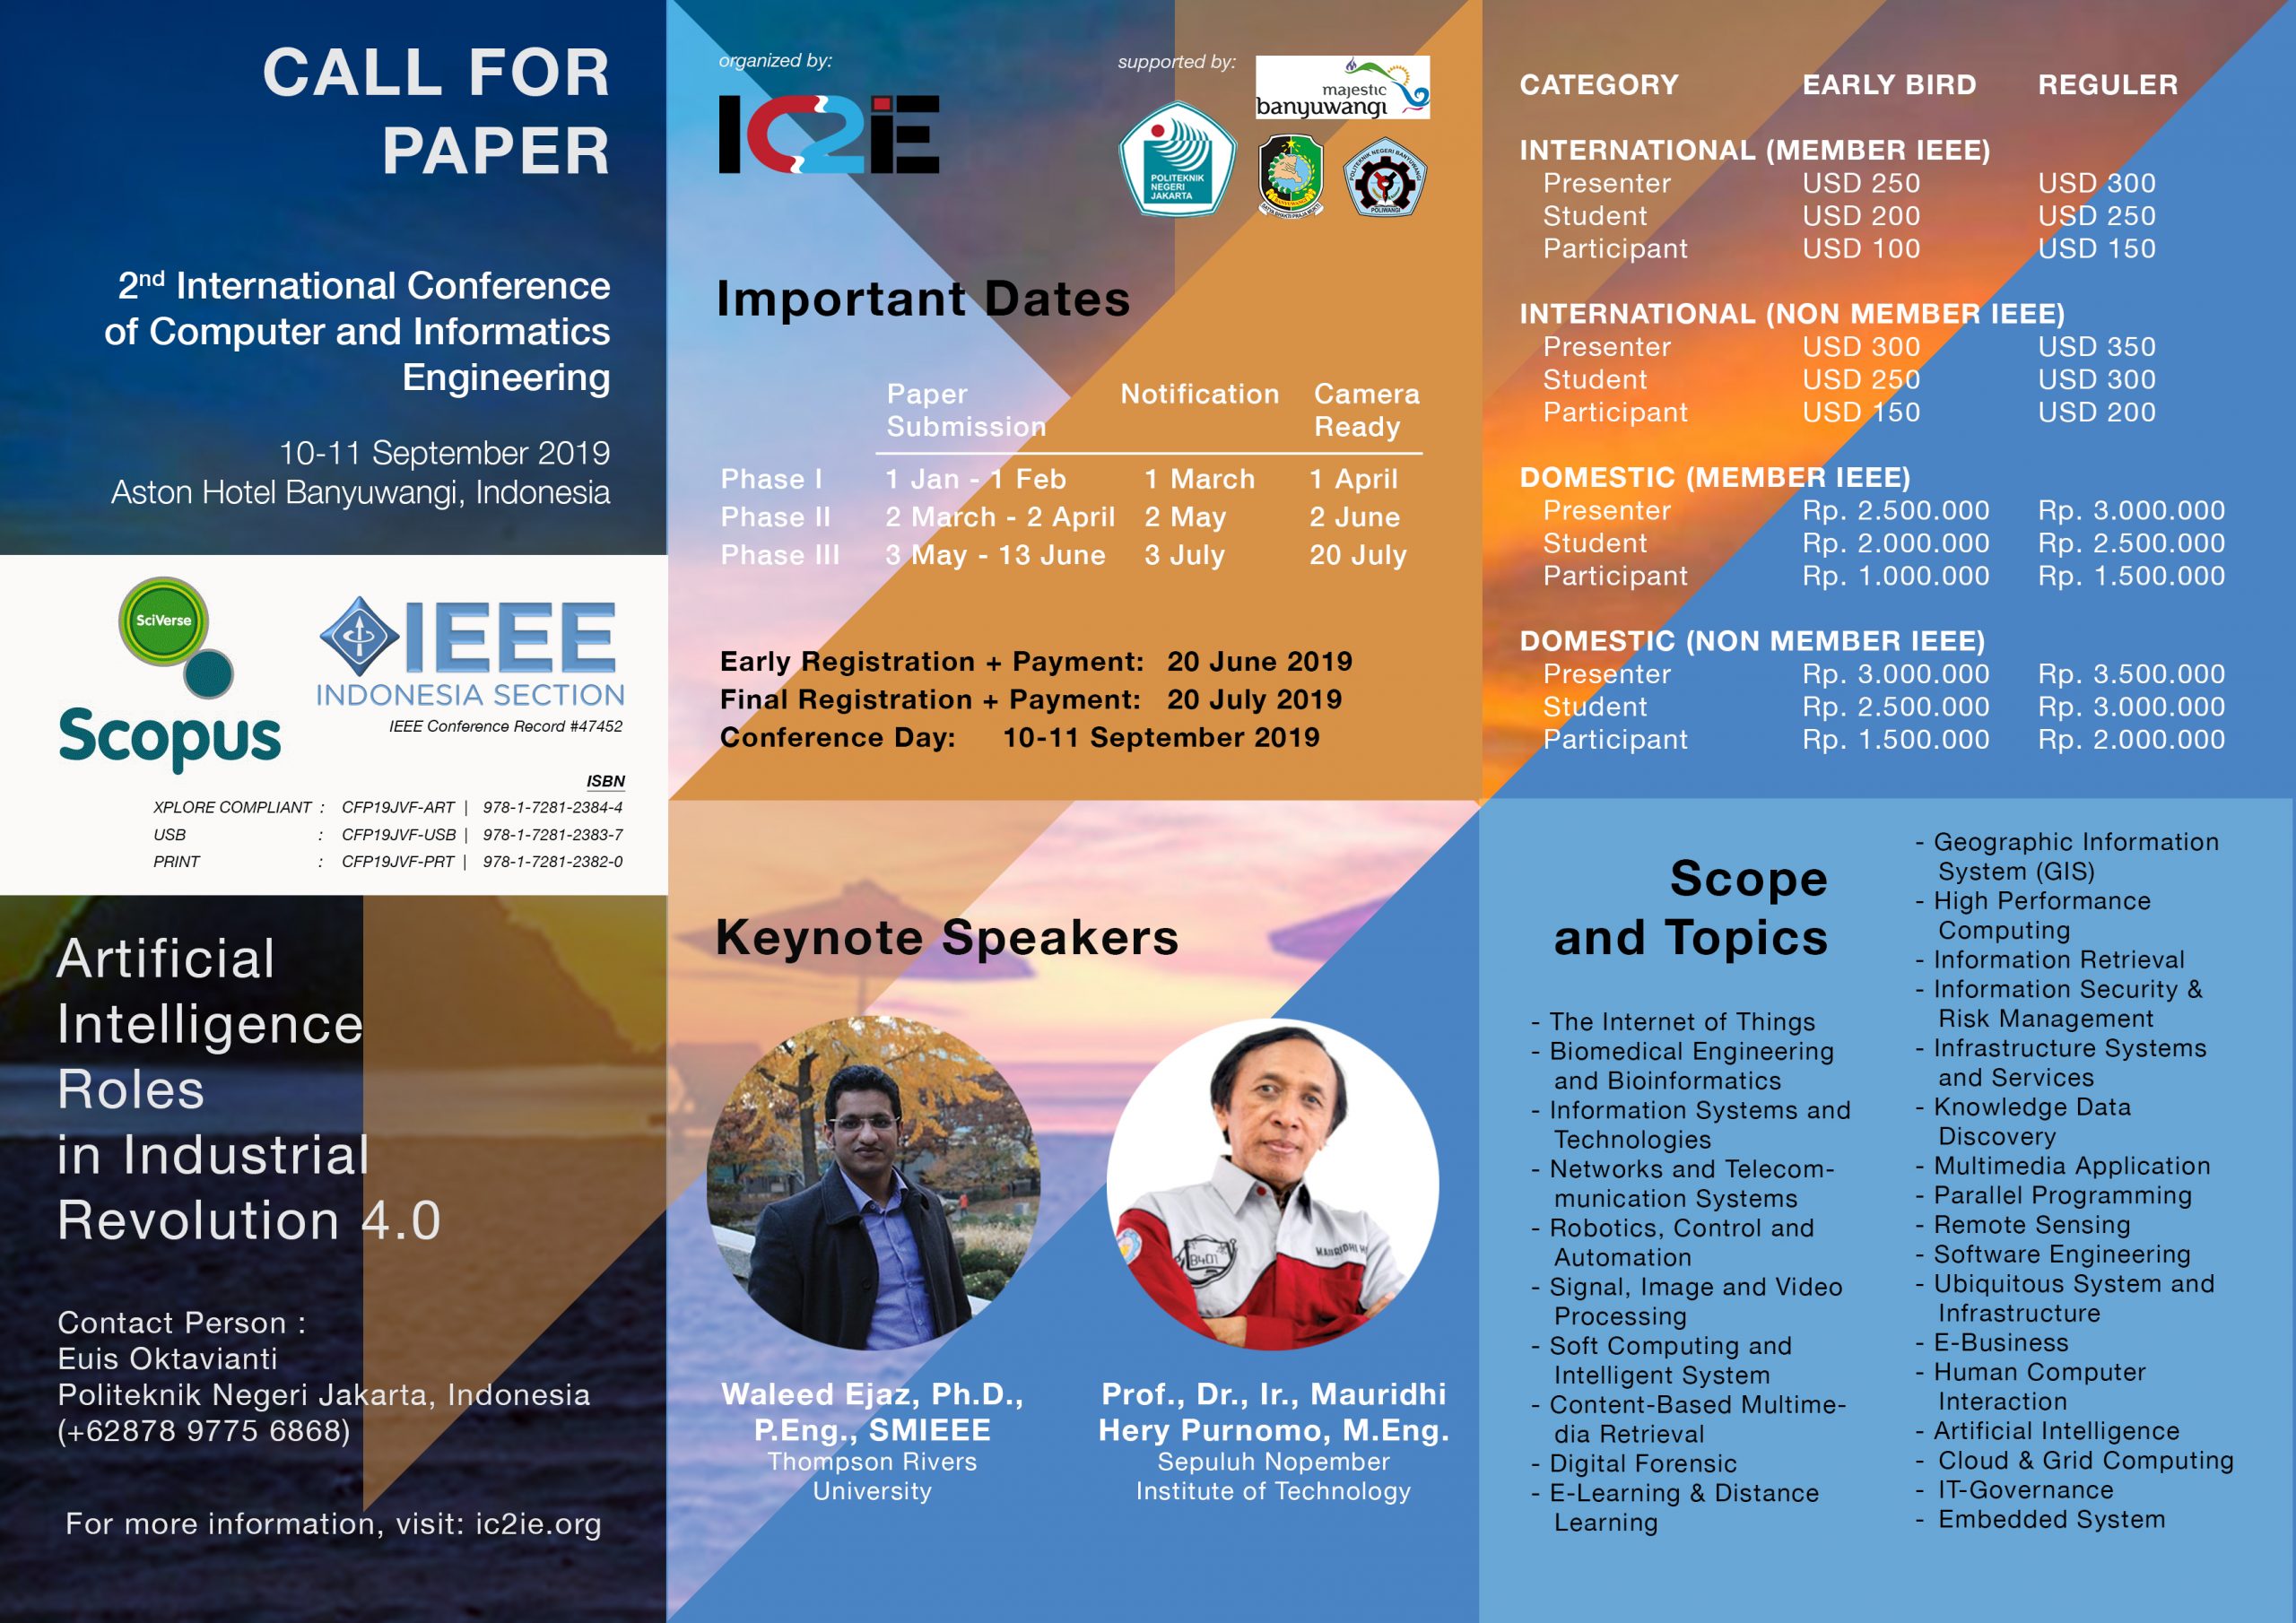 The 2nd International Conference of Computer and Informatics Engineering (IC2IE 2019)